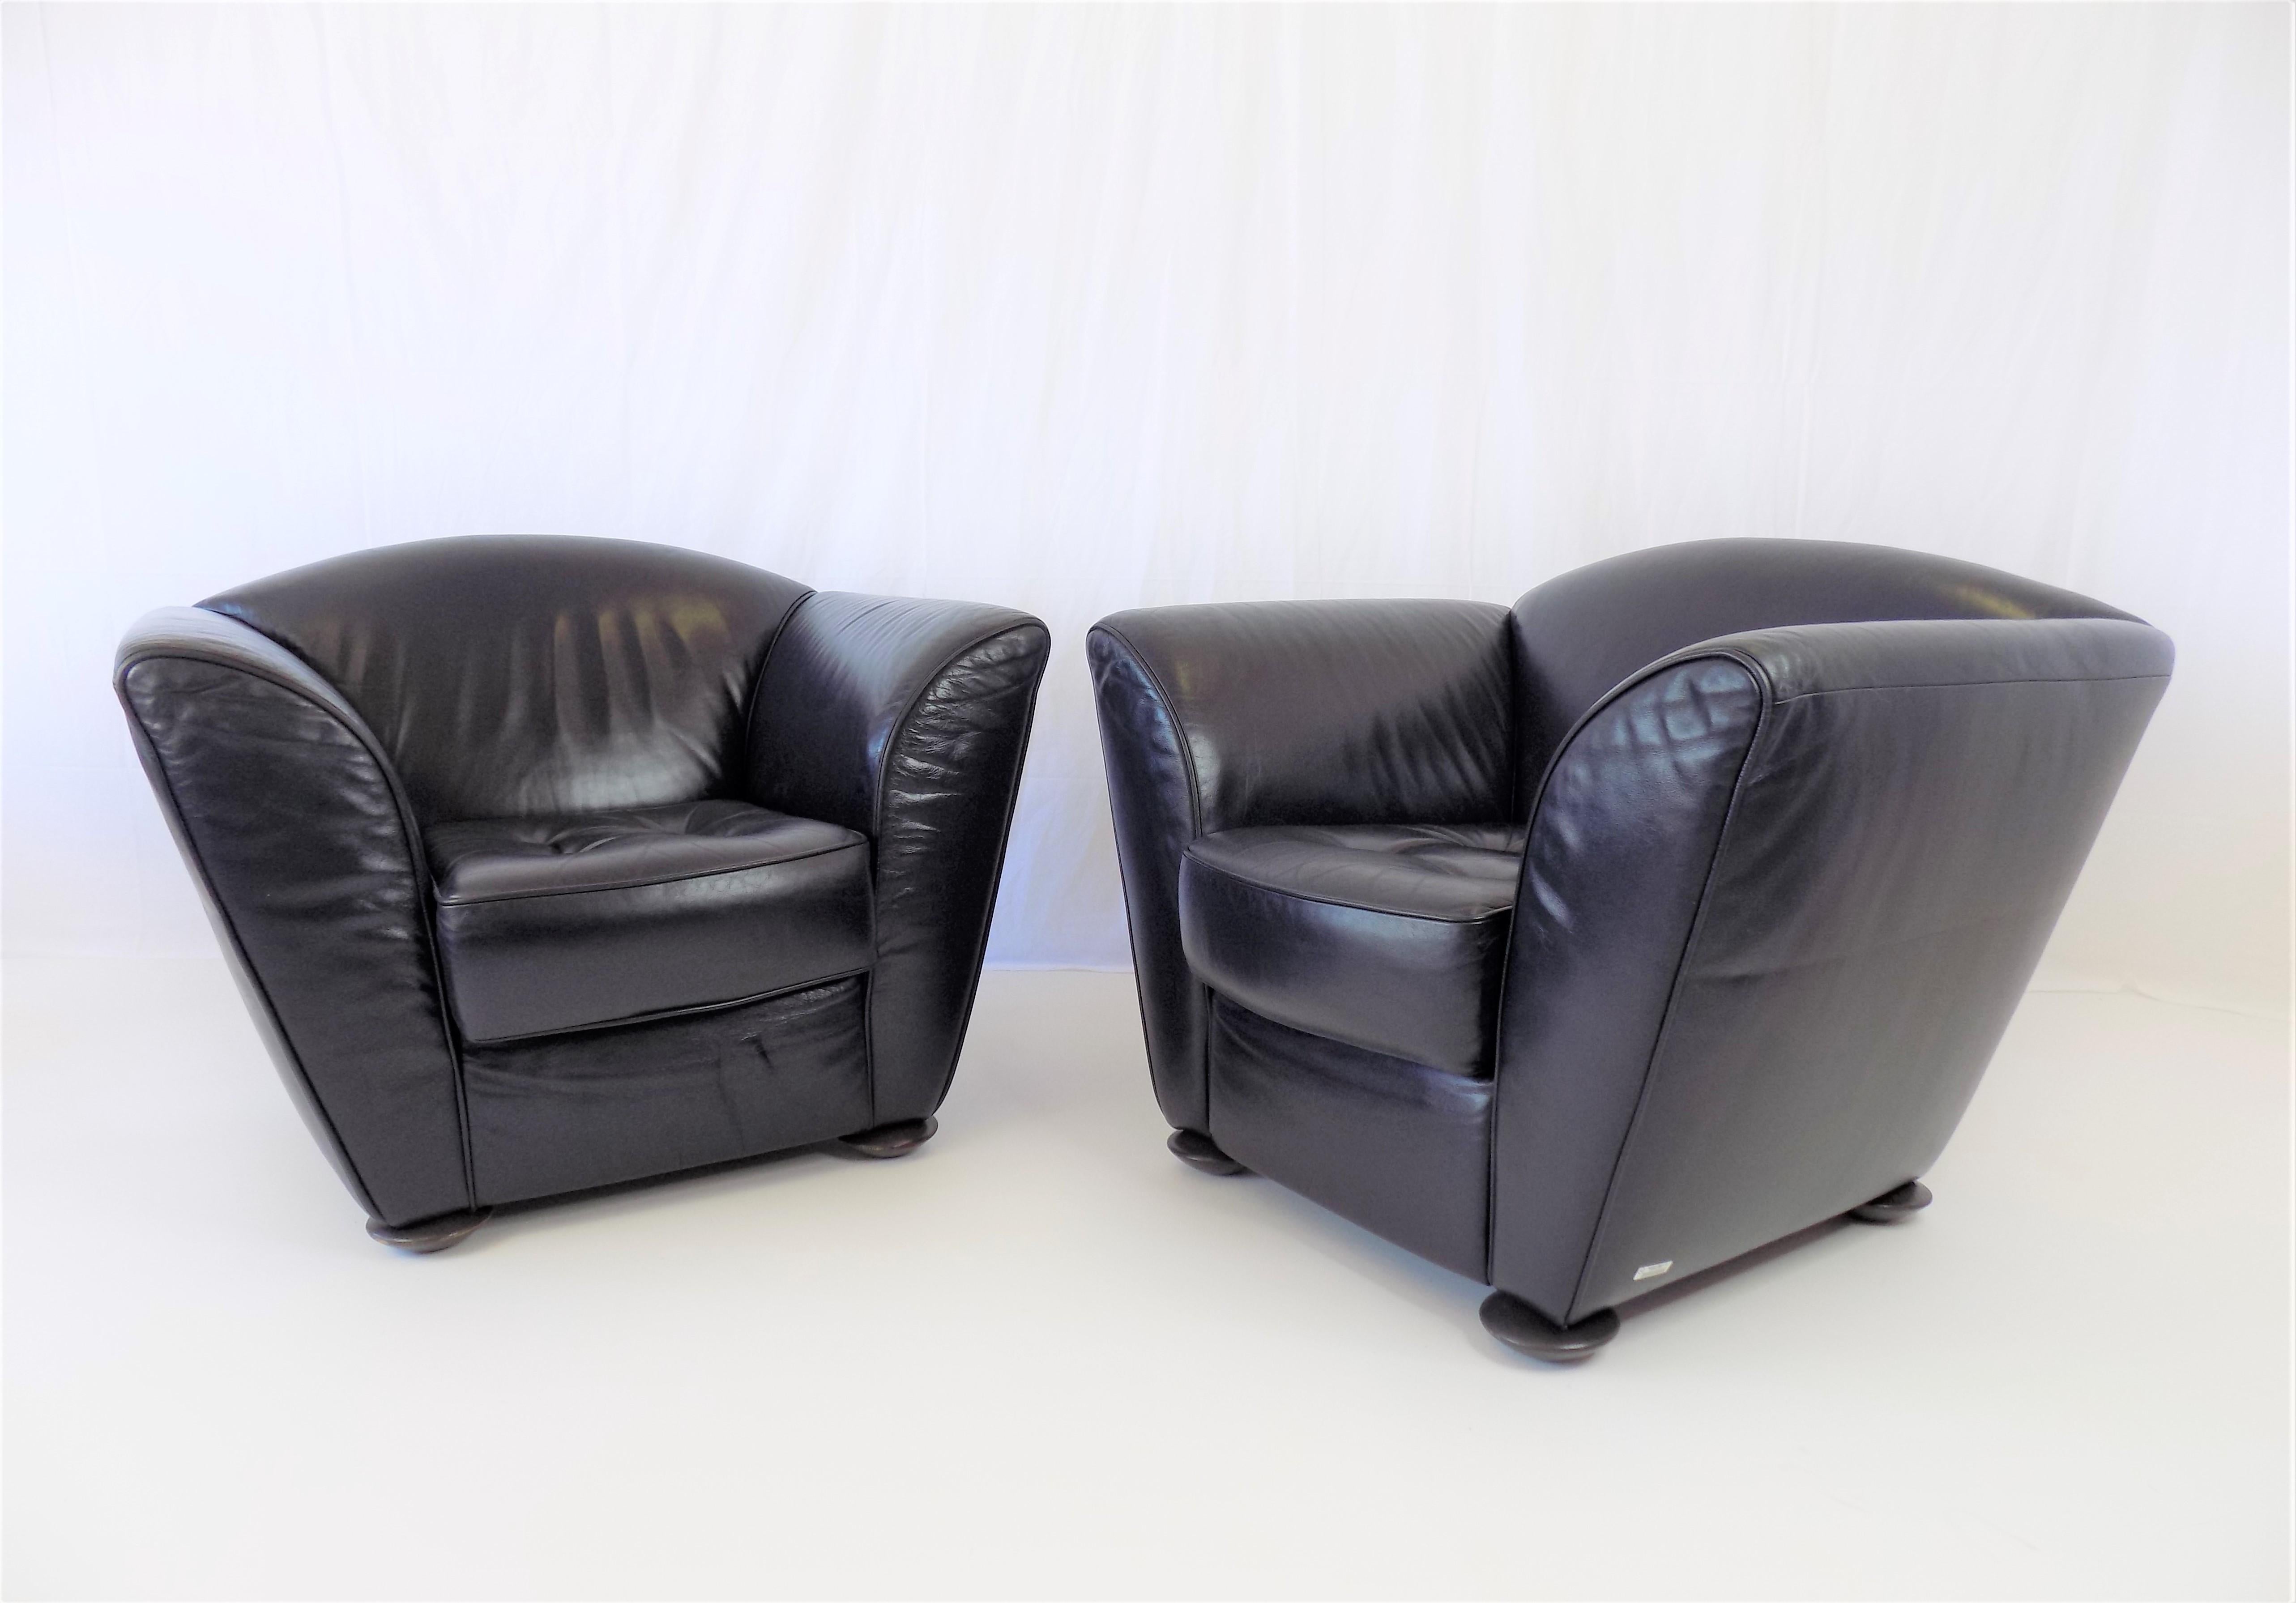 Cor Zelda Set of 2 Leather Armchairs By Peter Maly, Germany, 1980 For Sale 2